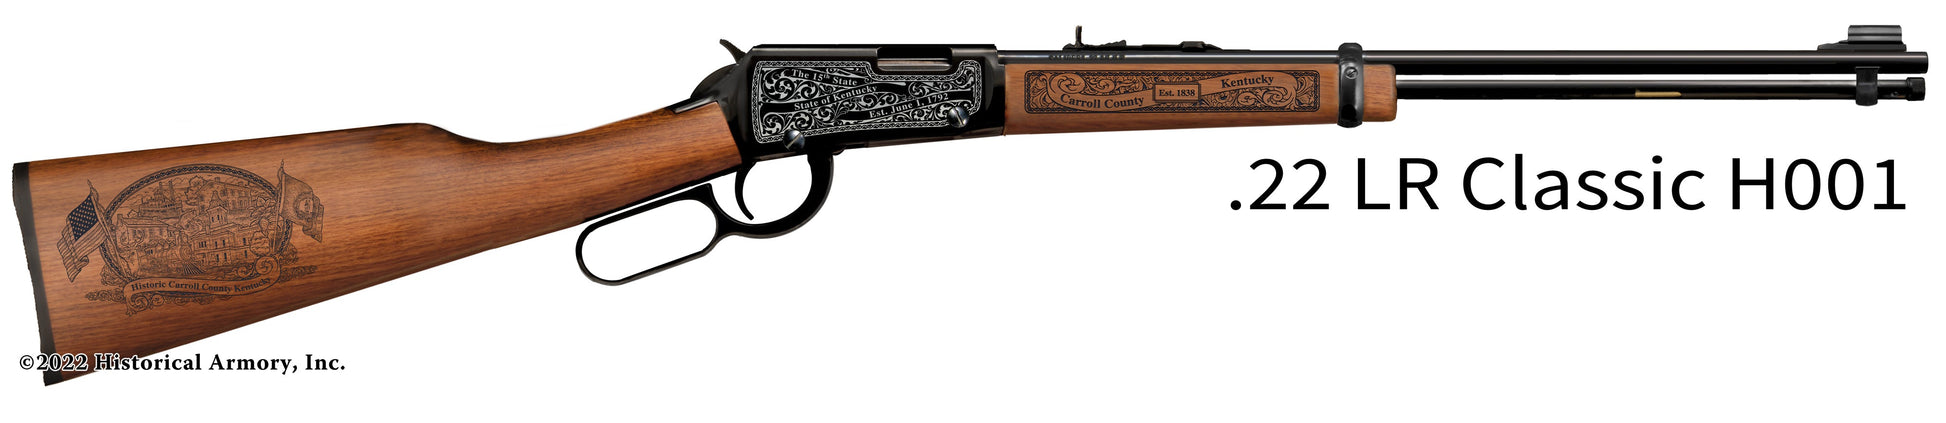 Carroll County Kentucky Engraved Henry H001 Rifle